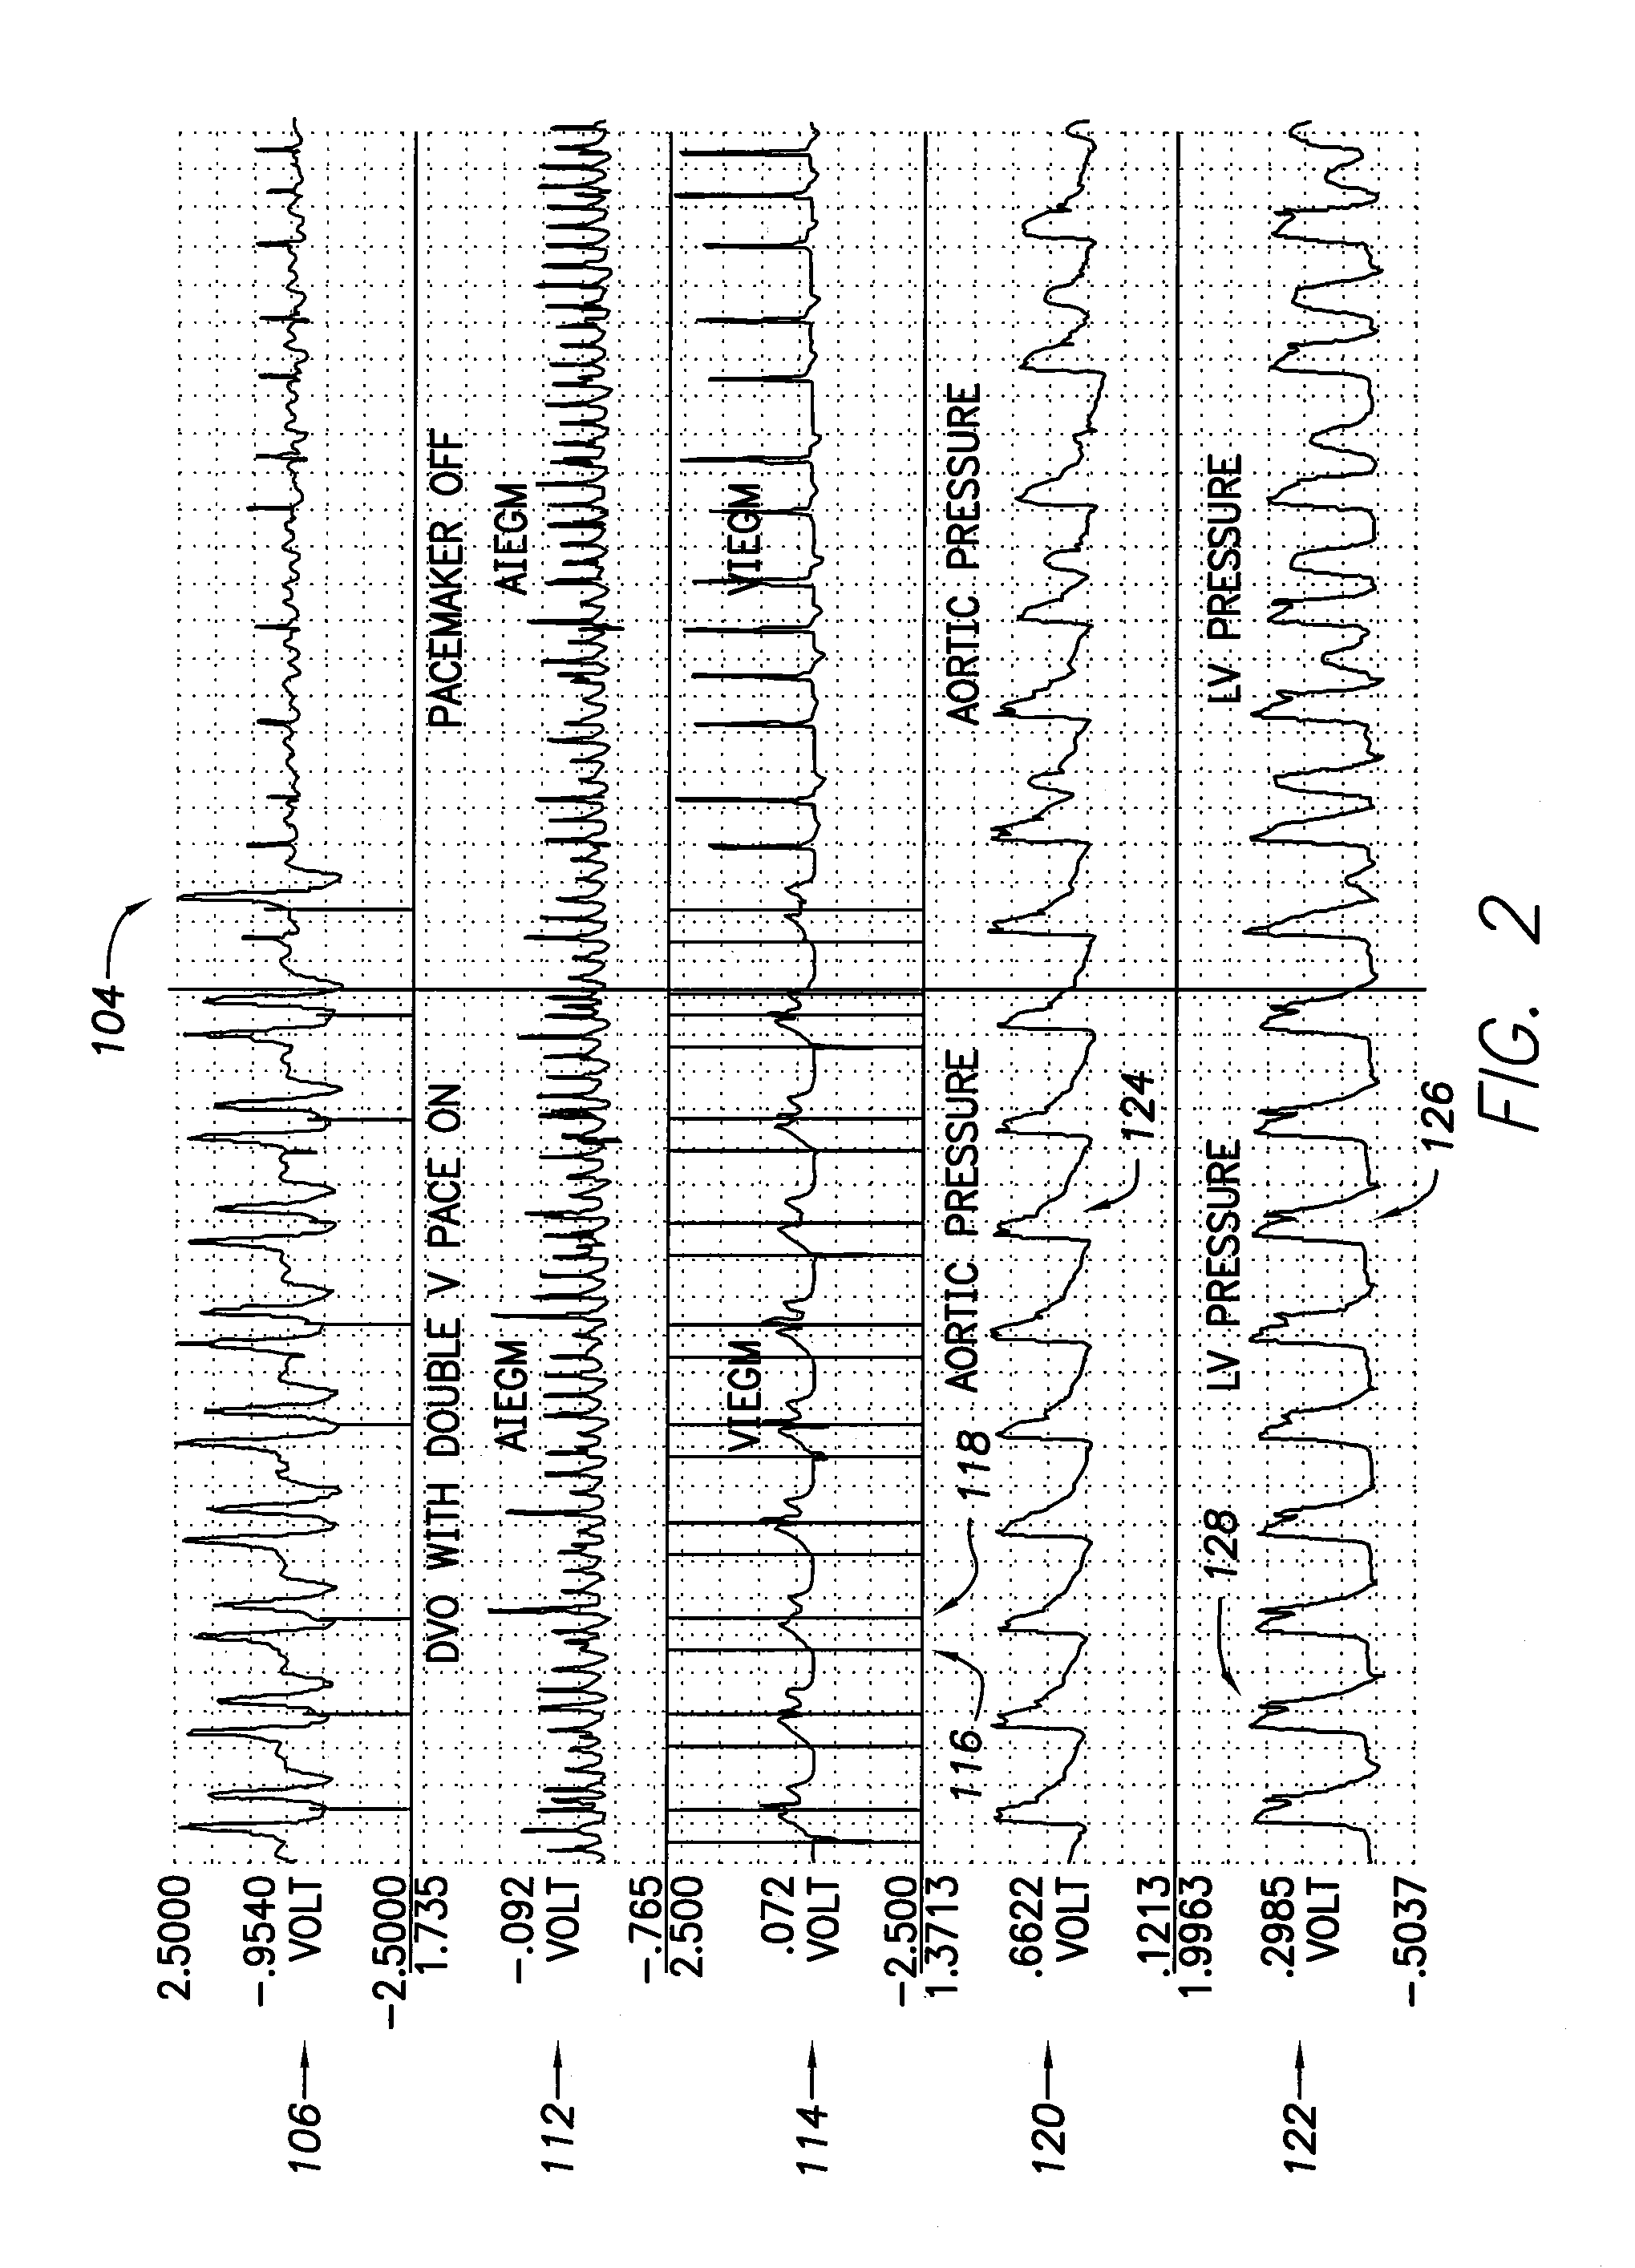 Systems and methods for paired/coupled pacing and dynamic overdrive/underdrive pacing